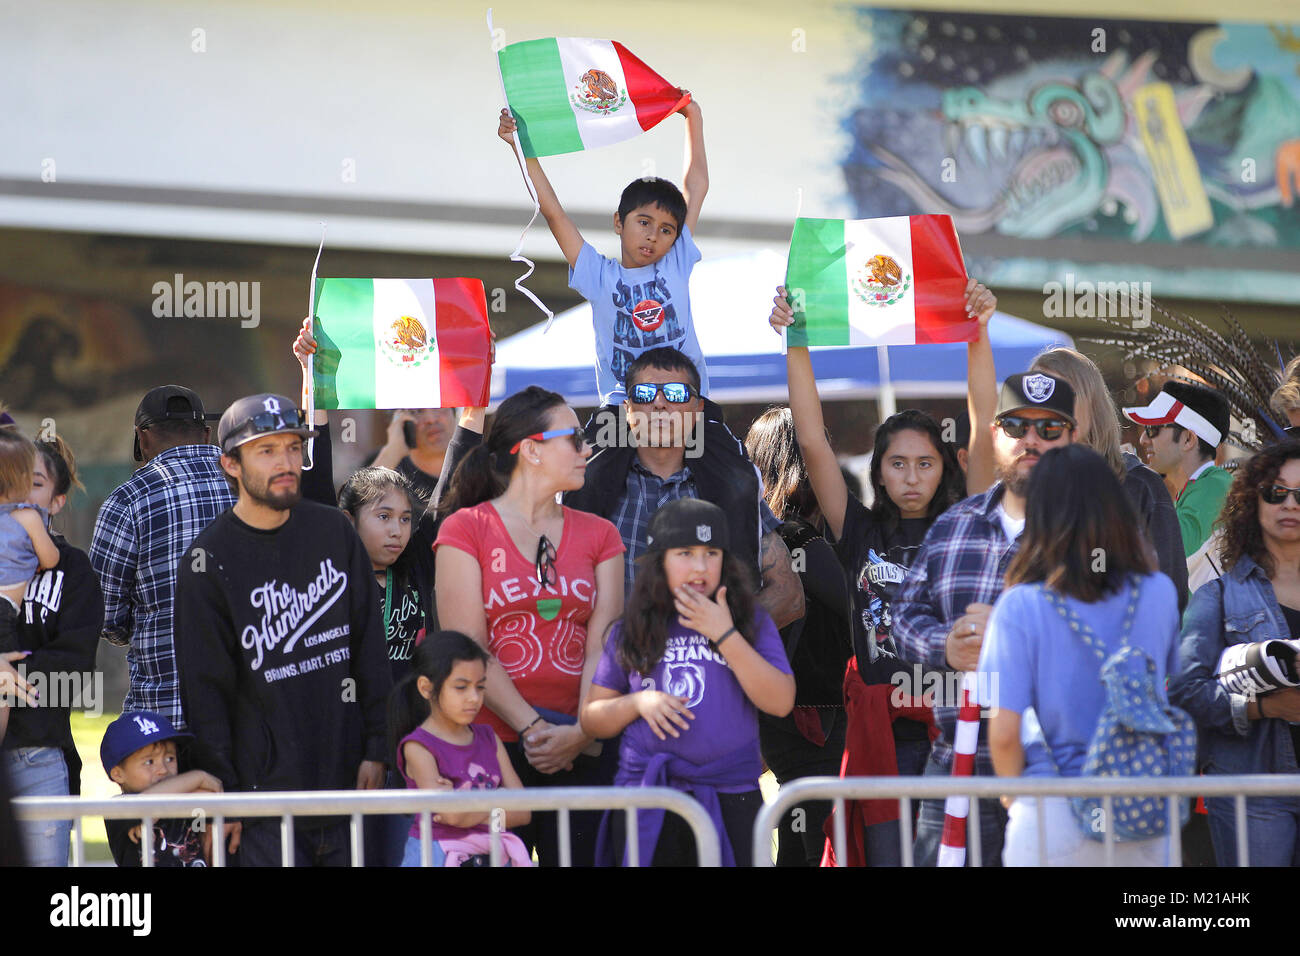 San Diego, CA, USA. 3rd Feb, 2018. Several right-wing groups aligned with the Patriotic Picnic held a few tables across from Chicano Park protesters, shown, in the Barrio Logan neighborhood of San Diego Saturday morning. Credit: John Gastaldo/ZUMA Wire/Alamy Live News Stock Photo